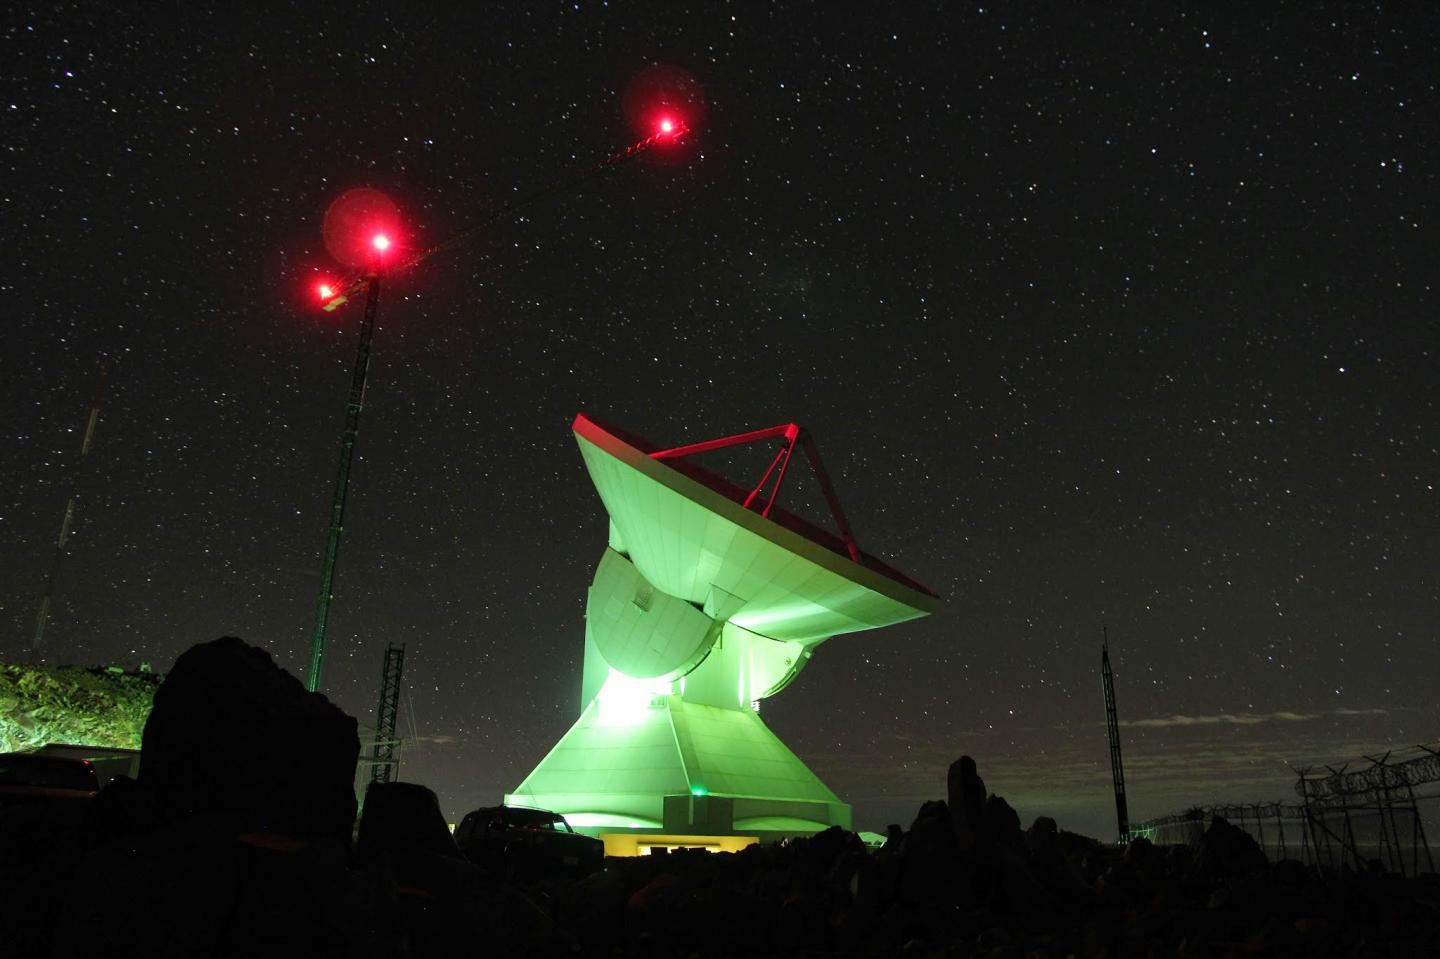 The Large Millimeter Telescope in Mexico